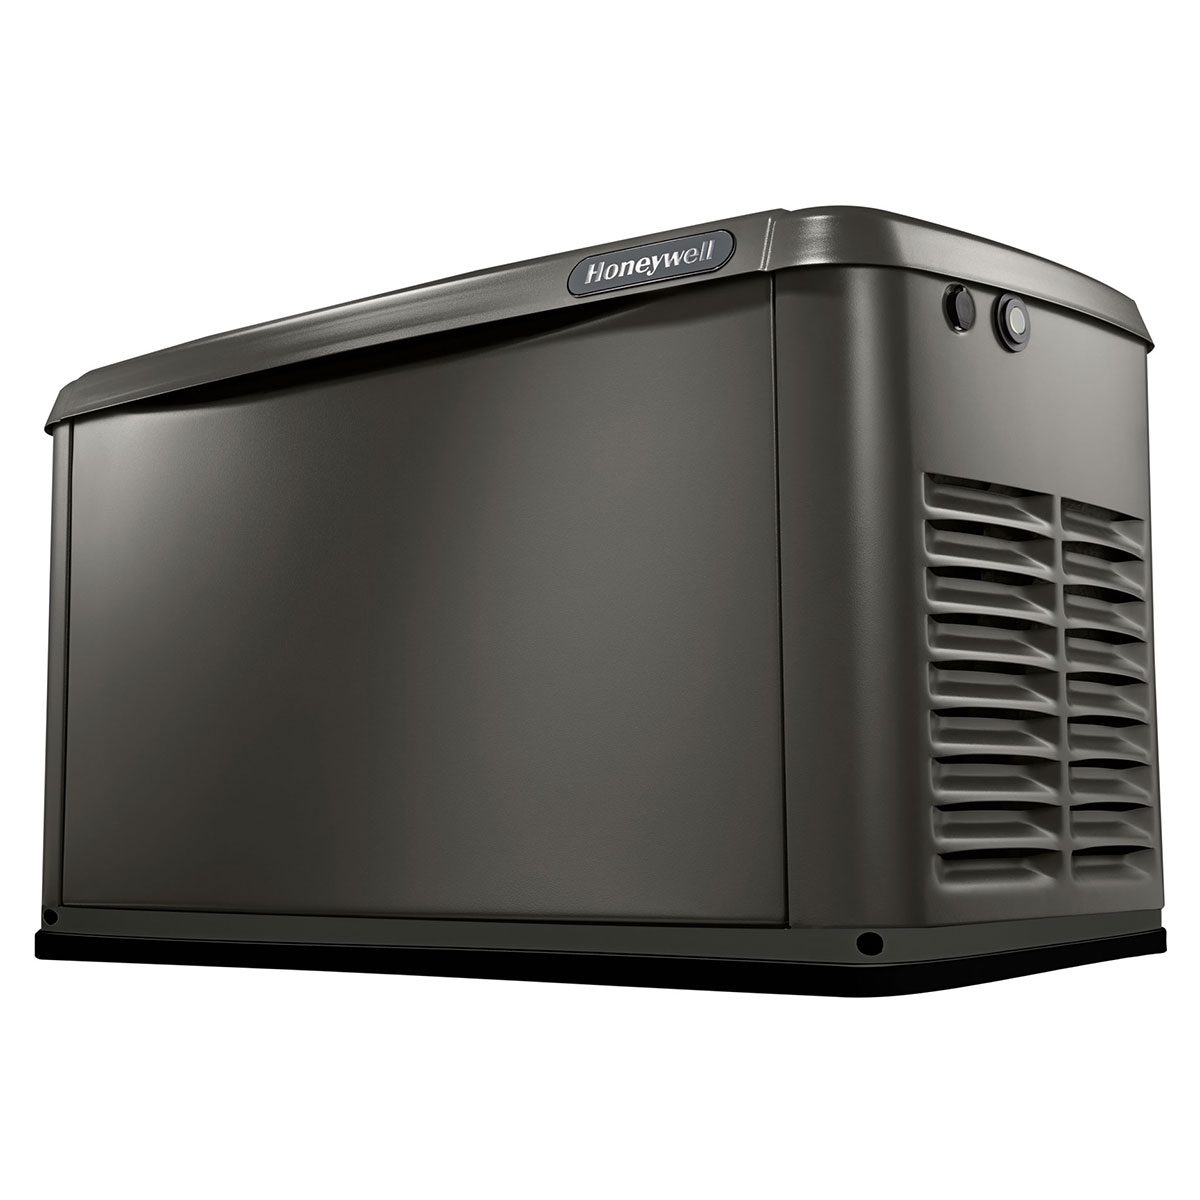 Honeywell 14kW Air Cooled Home Standby Generator, WiFi-Enabled - 7229